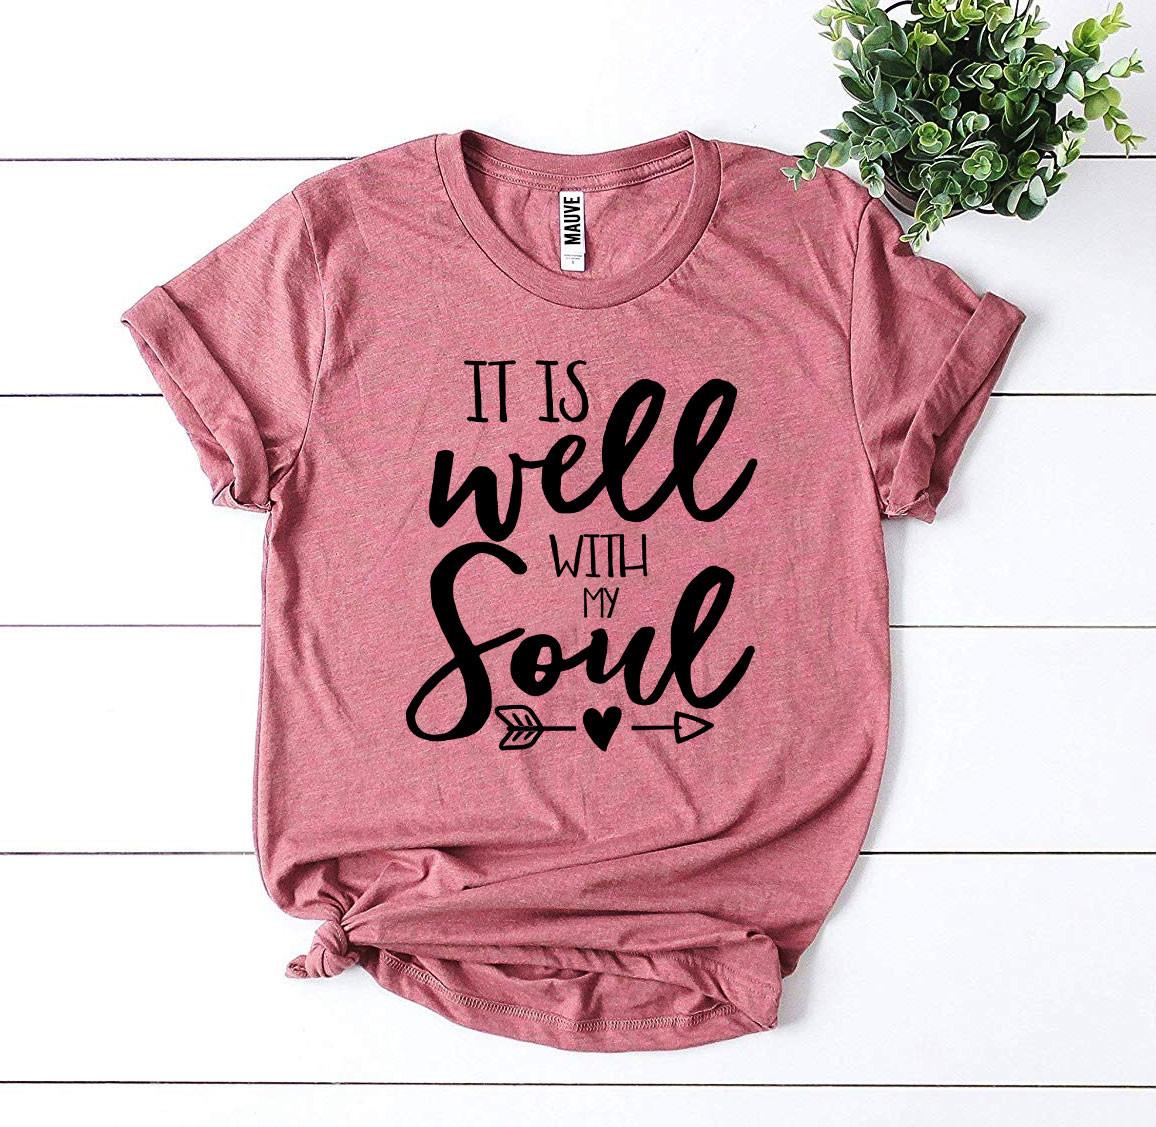 It Is Well With My Soul T-shirt